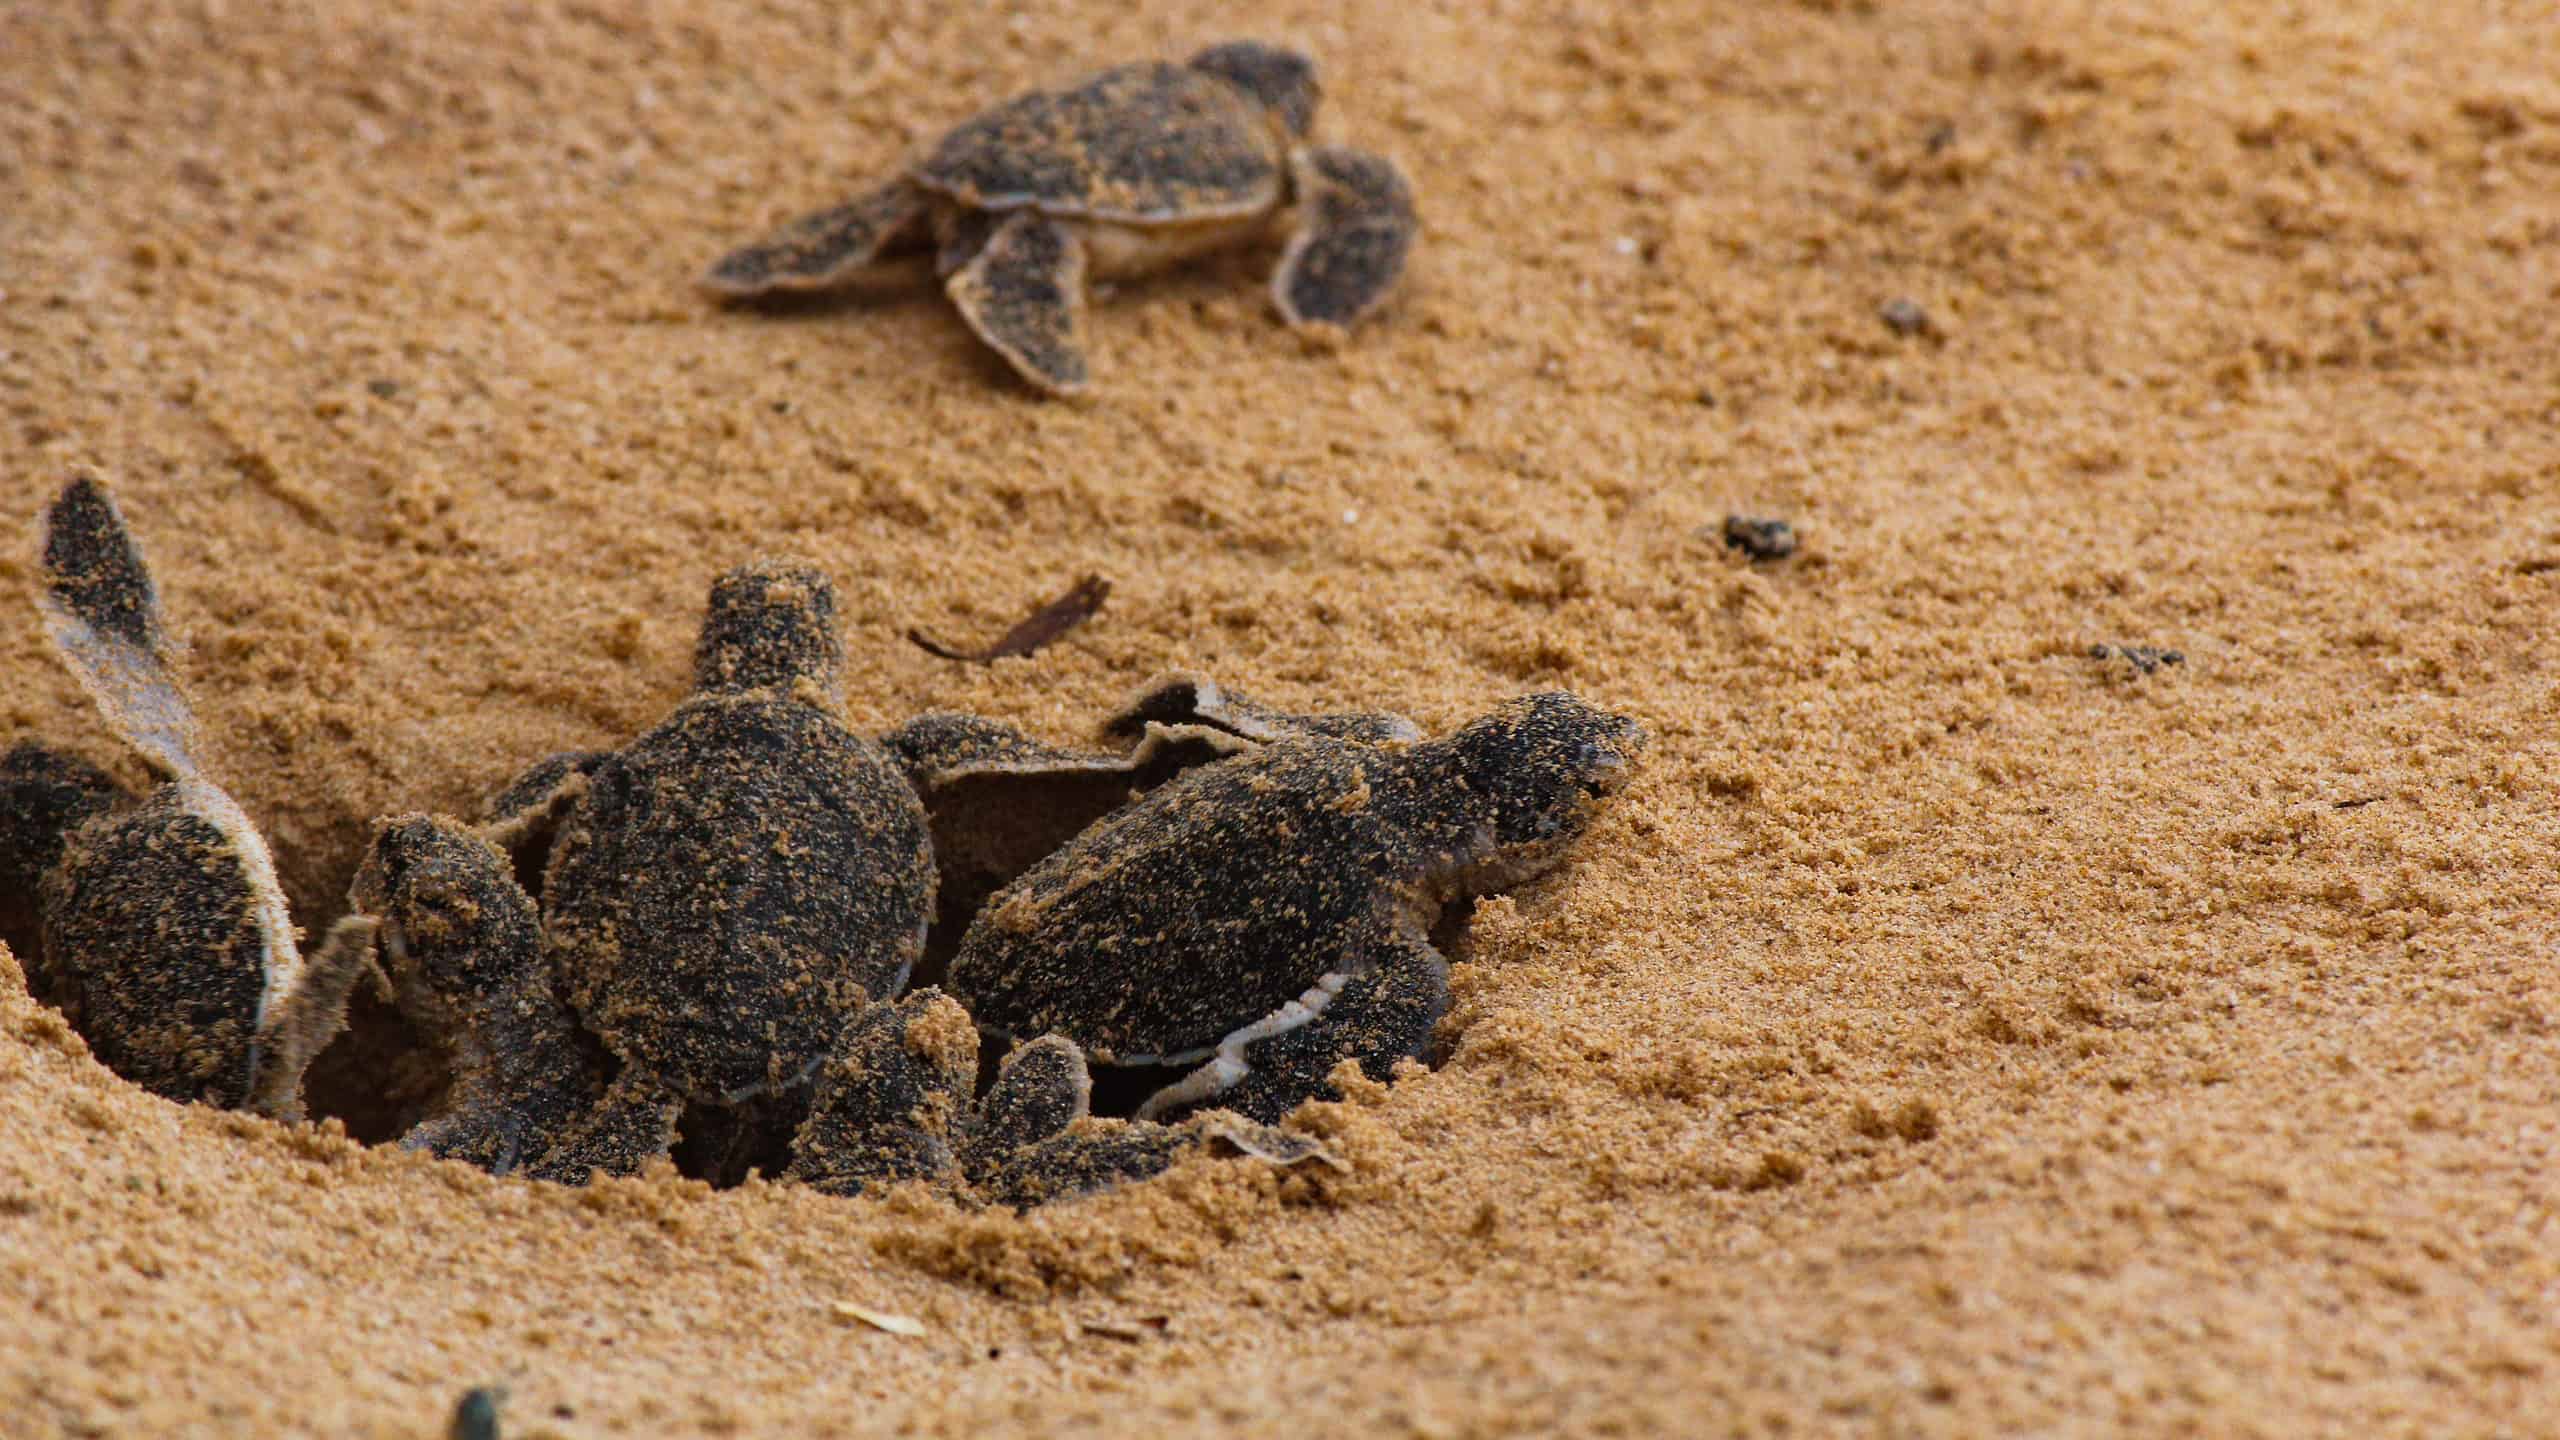 Baby sea turtles hatching from nest